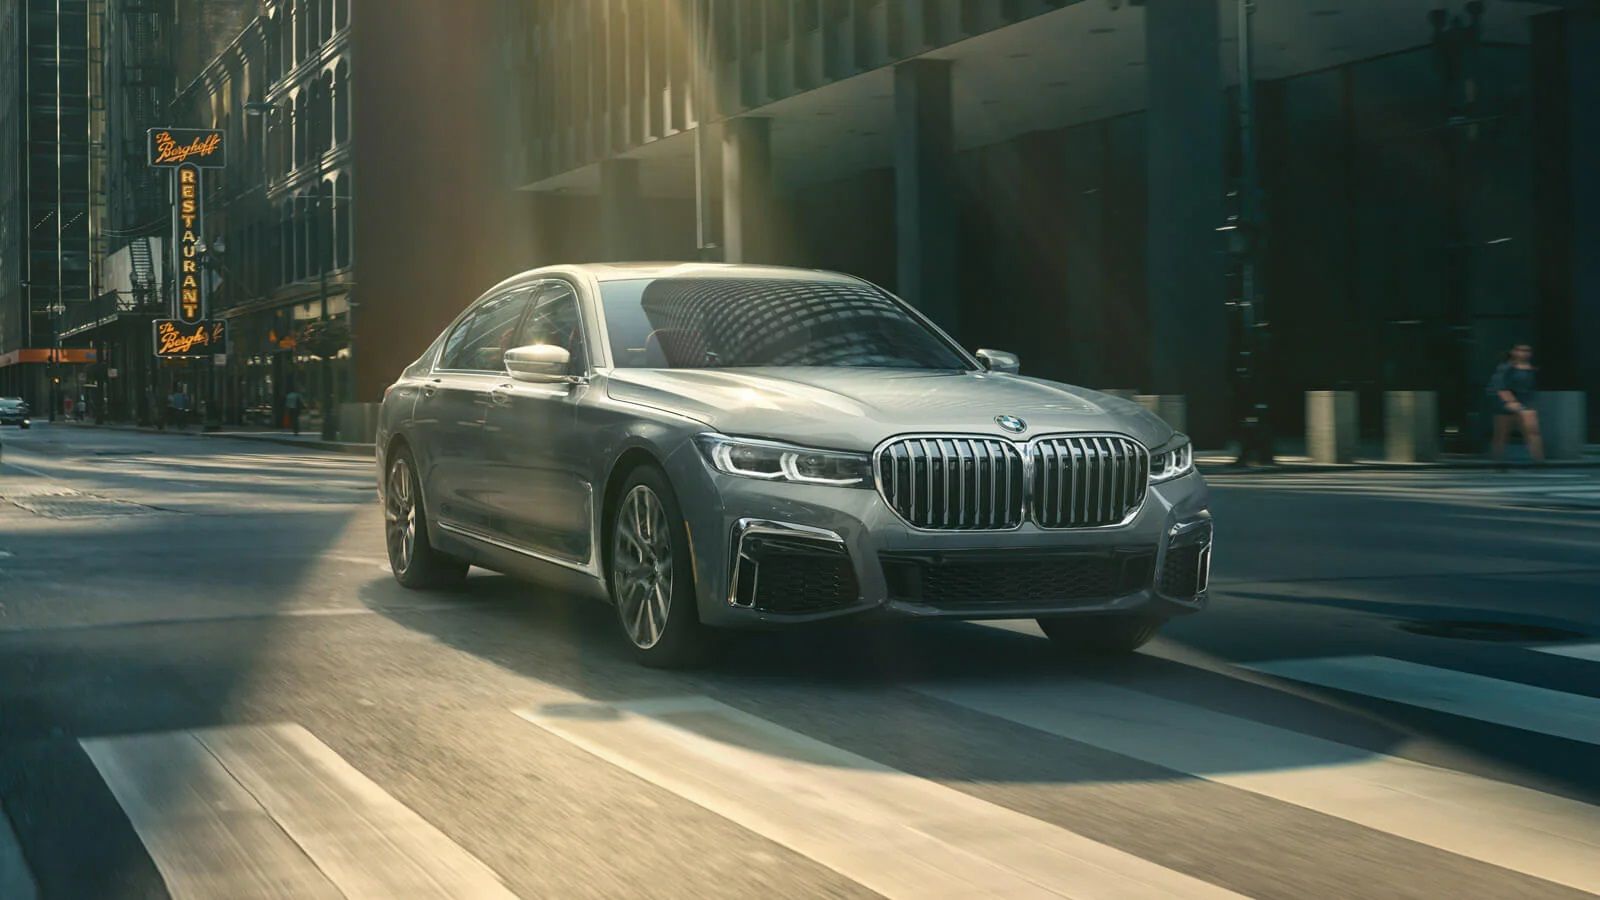 The 2022 BMW M760i xDrive on the highway